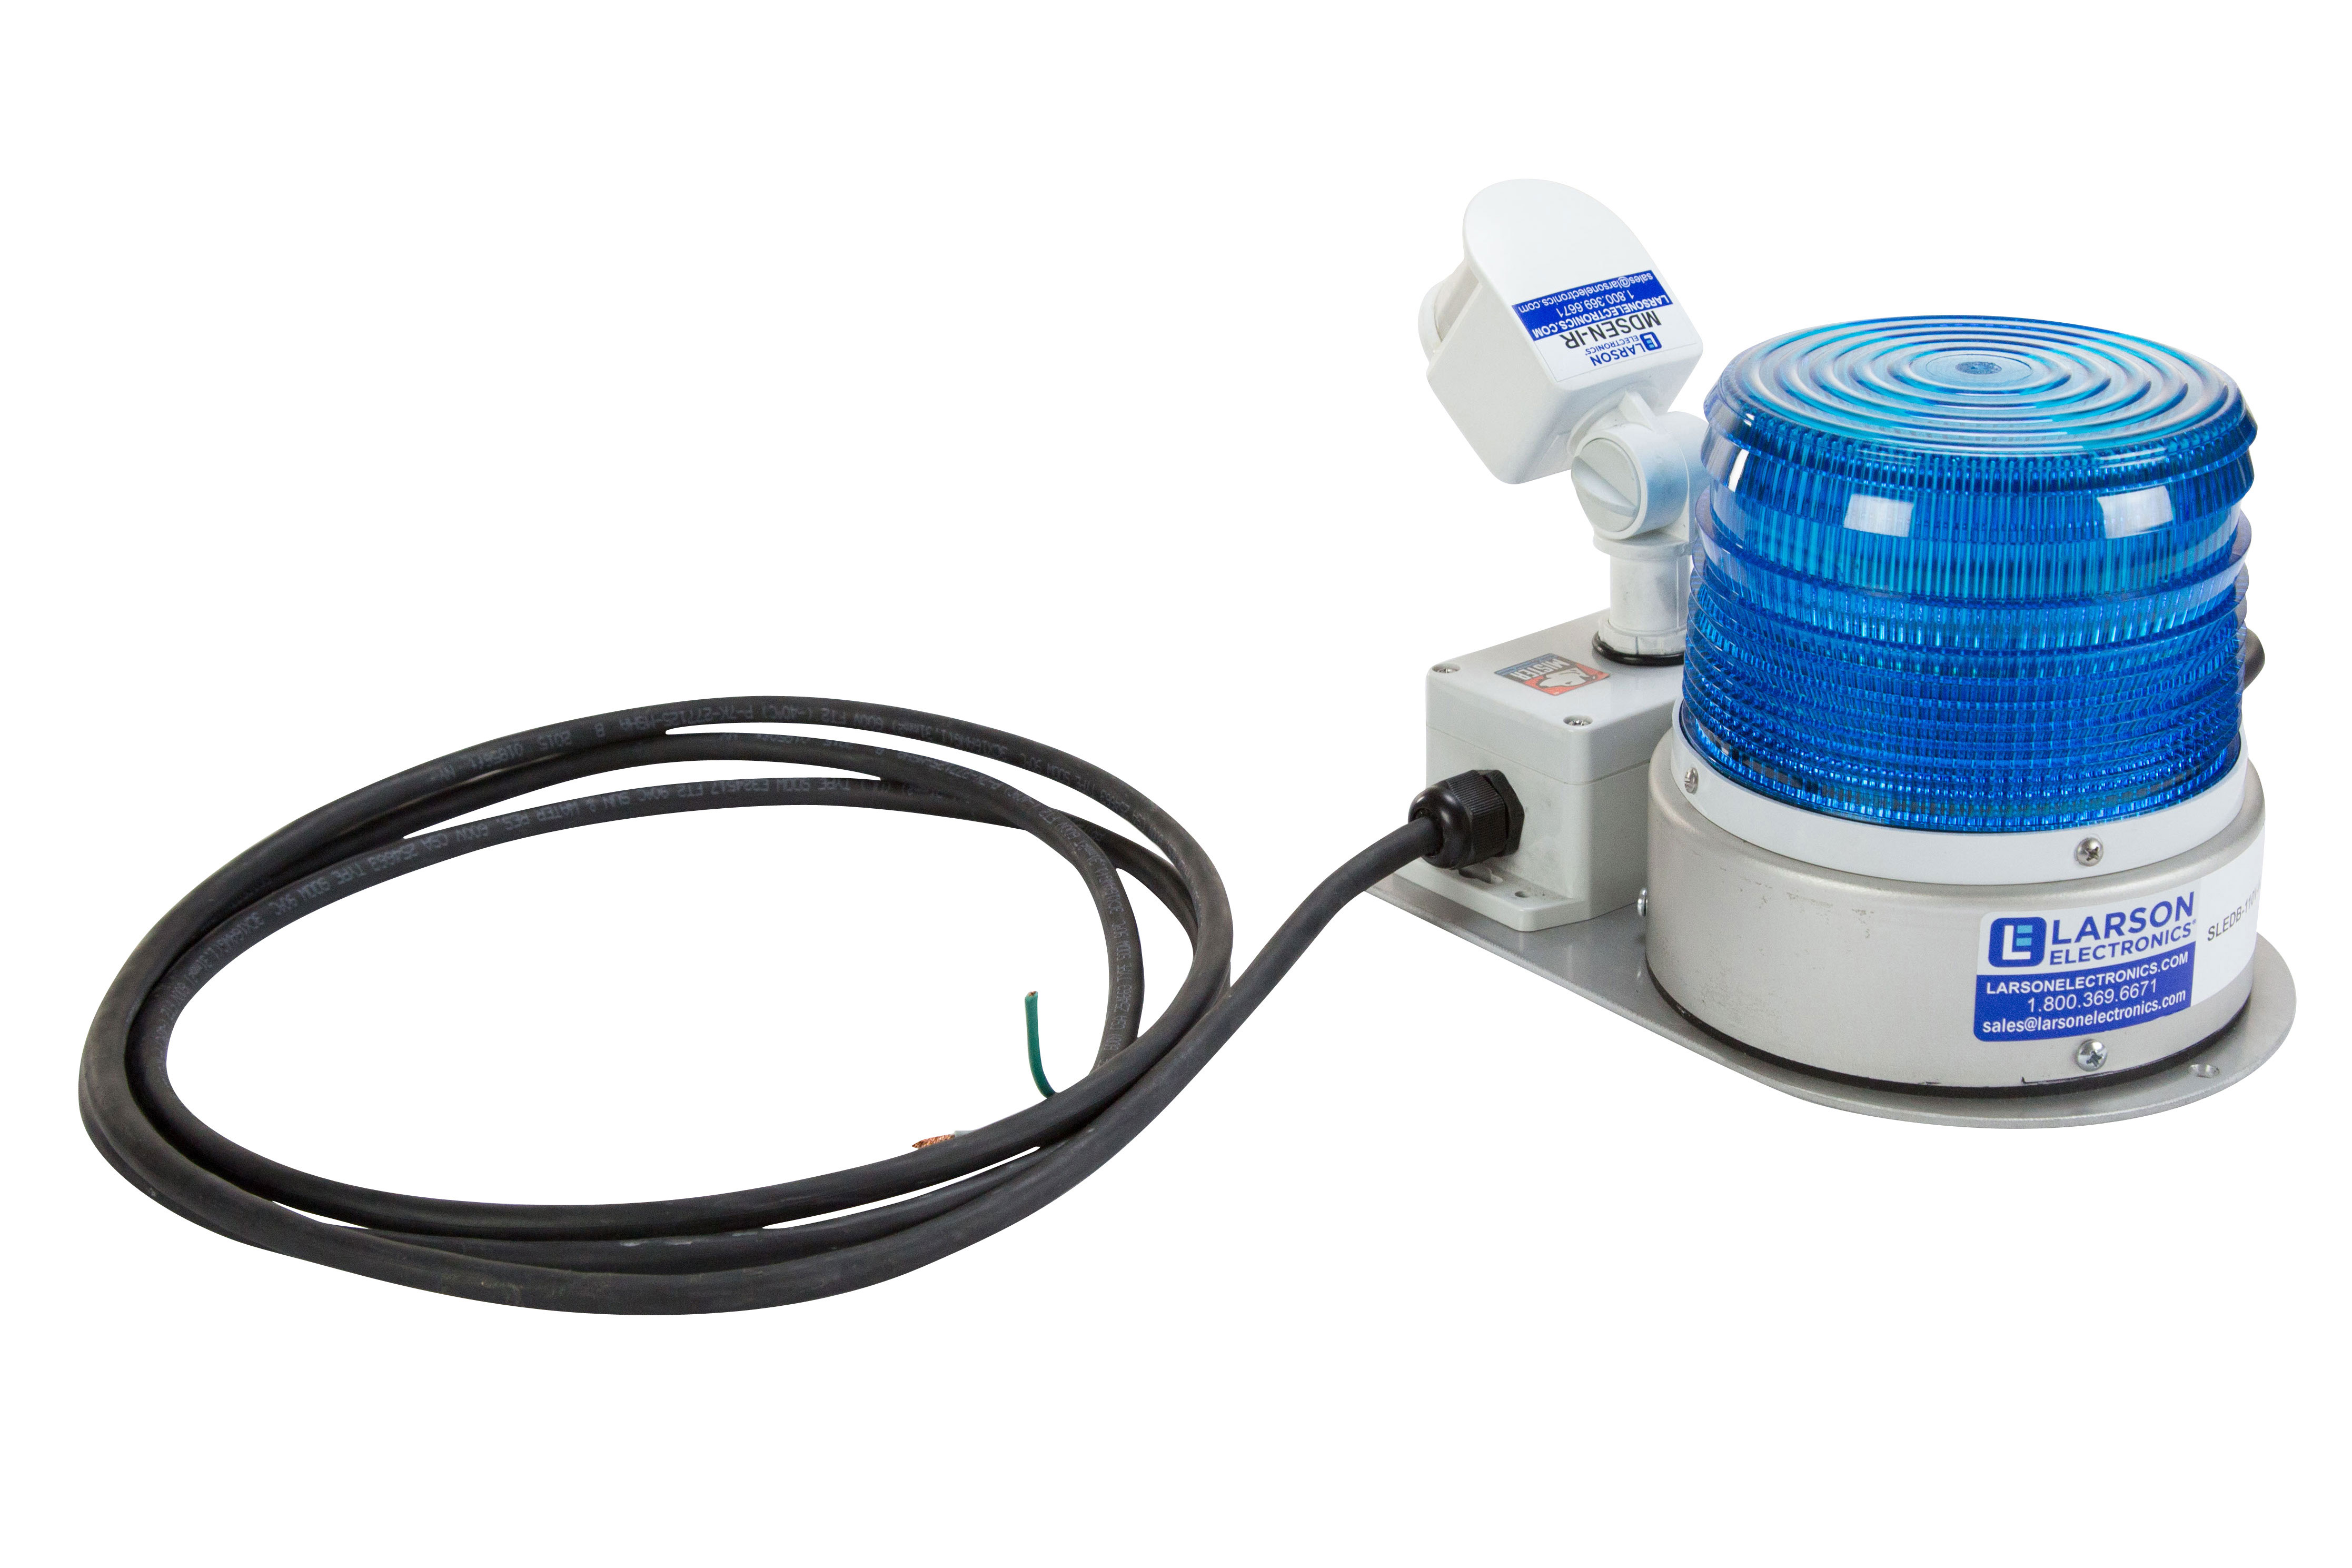 Class II LED Strobe Light Equipped with a Motion Sensor